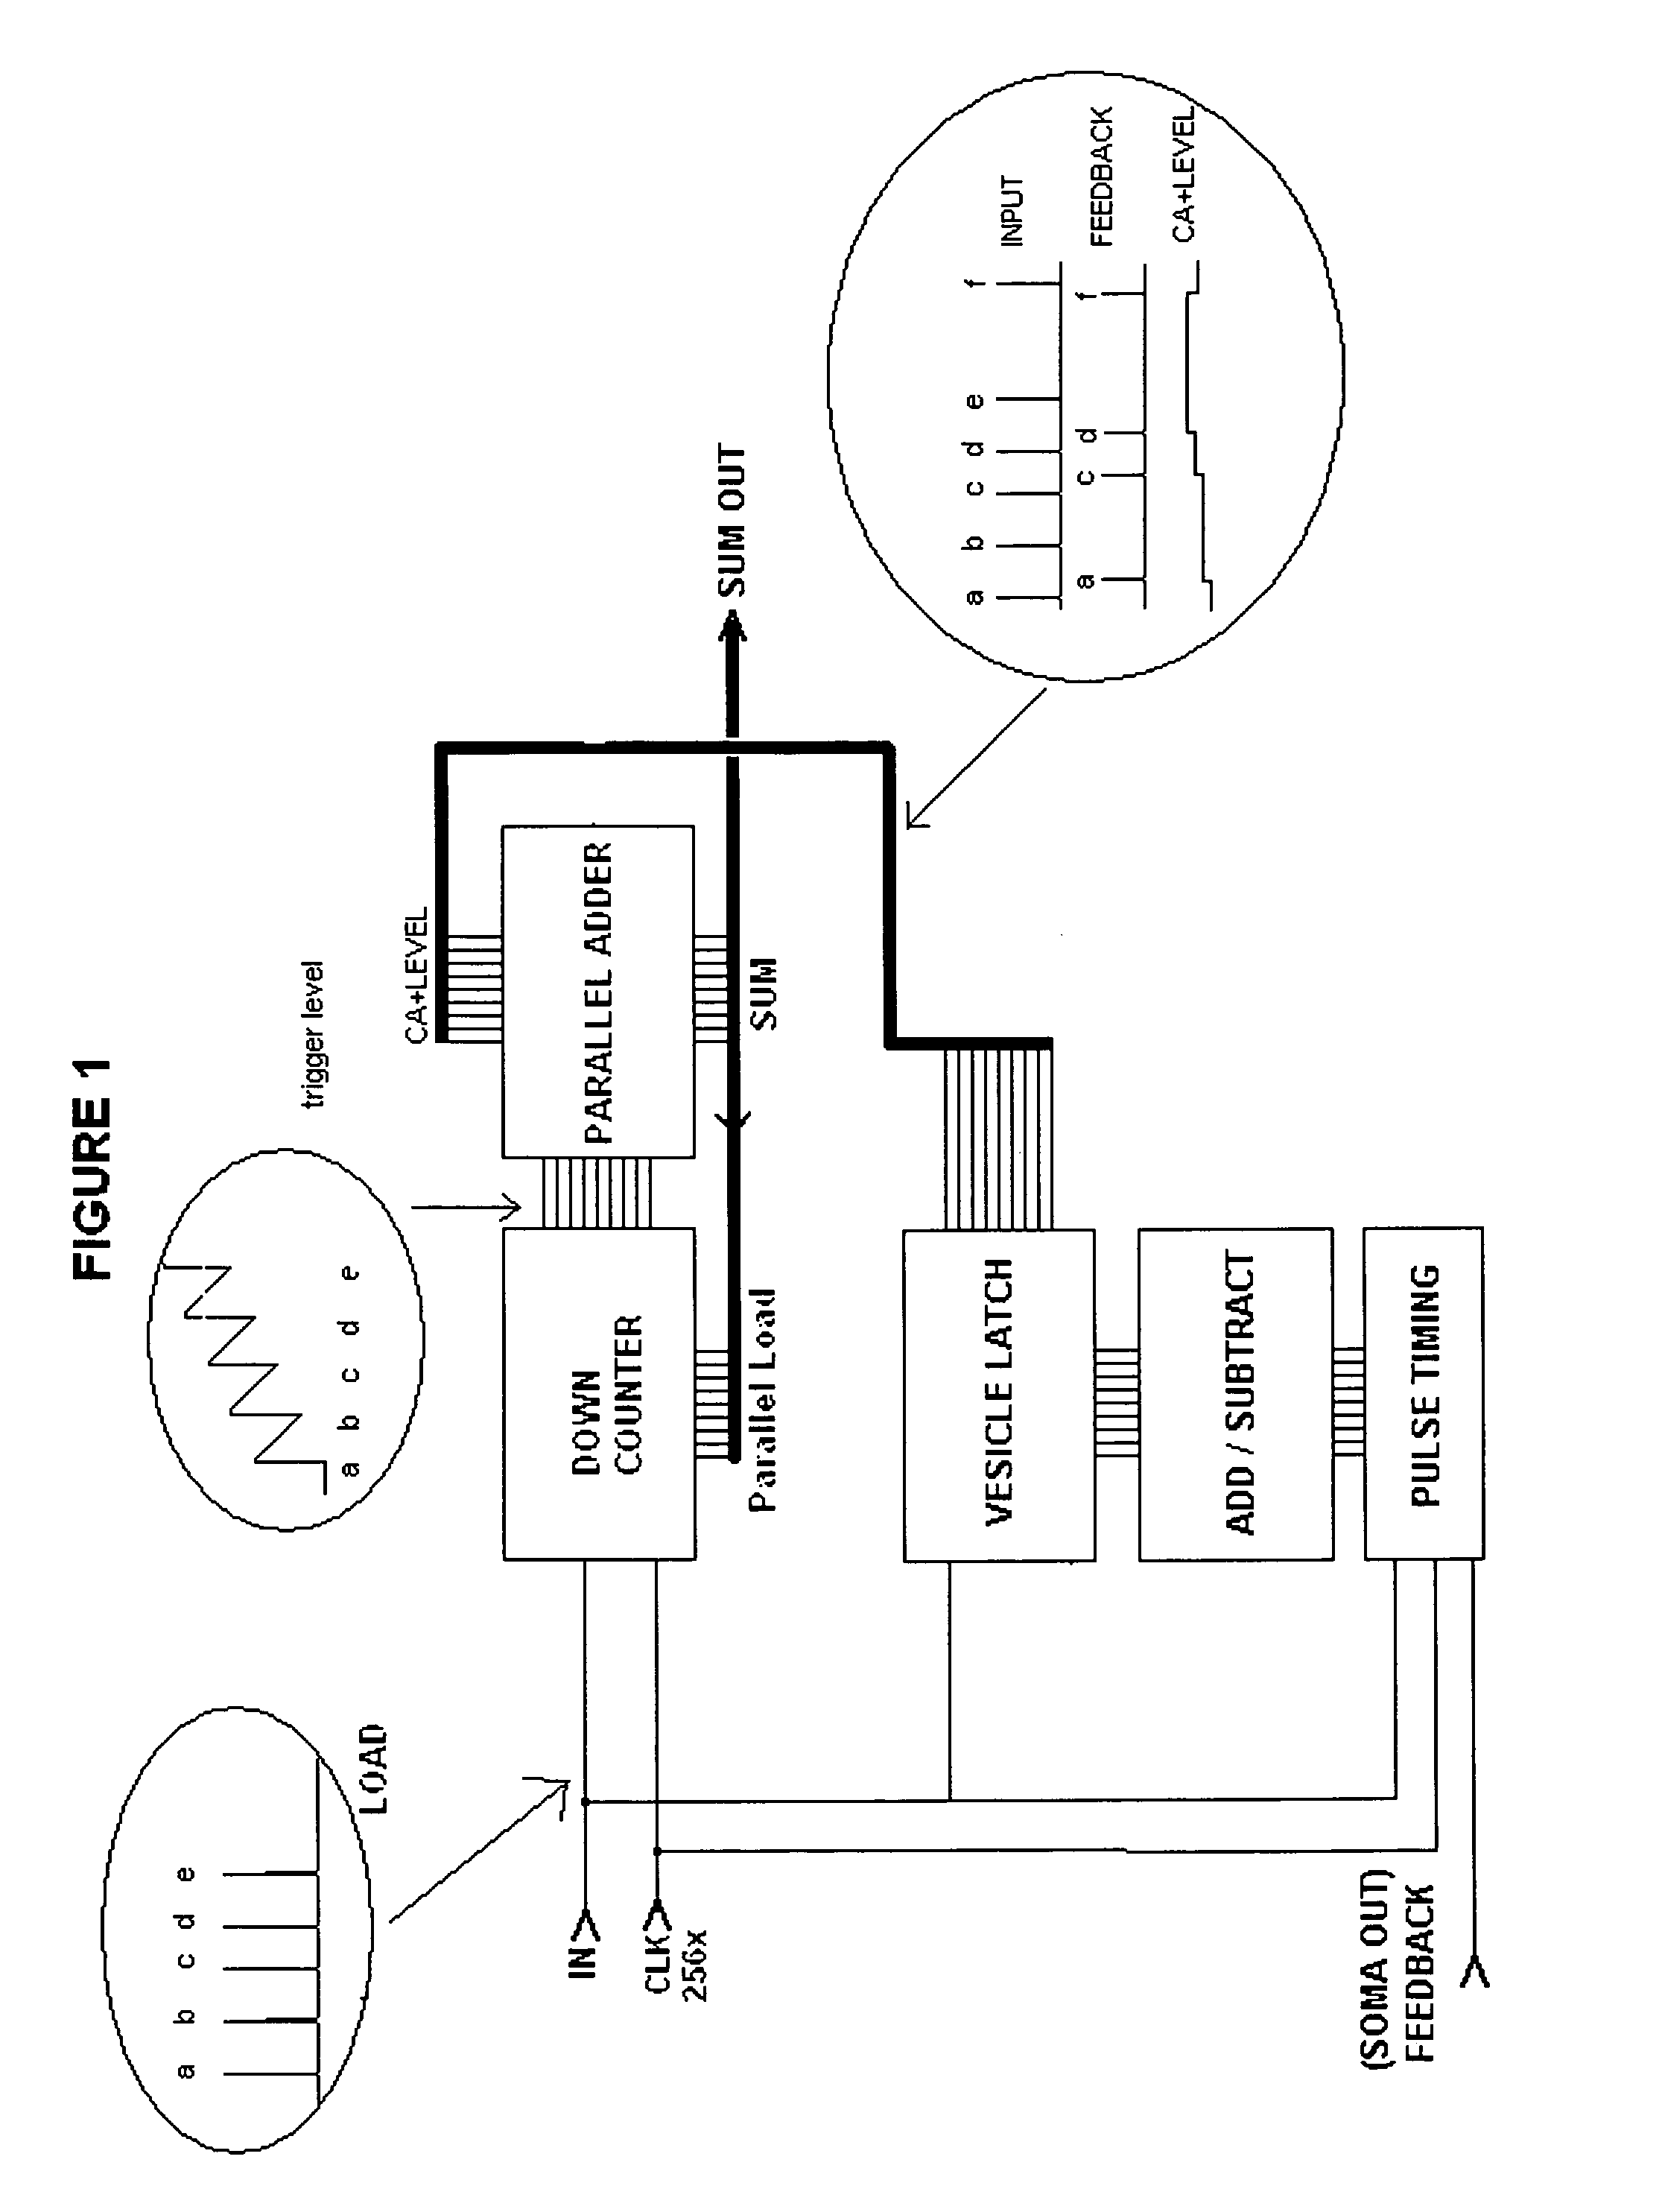 Autonomous learning dynamic artificial neural computing device and brain inspired system